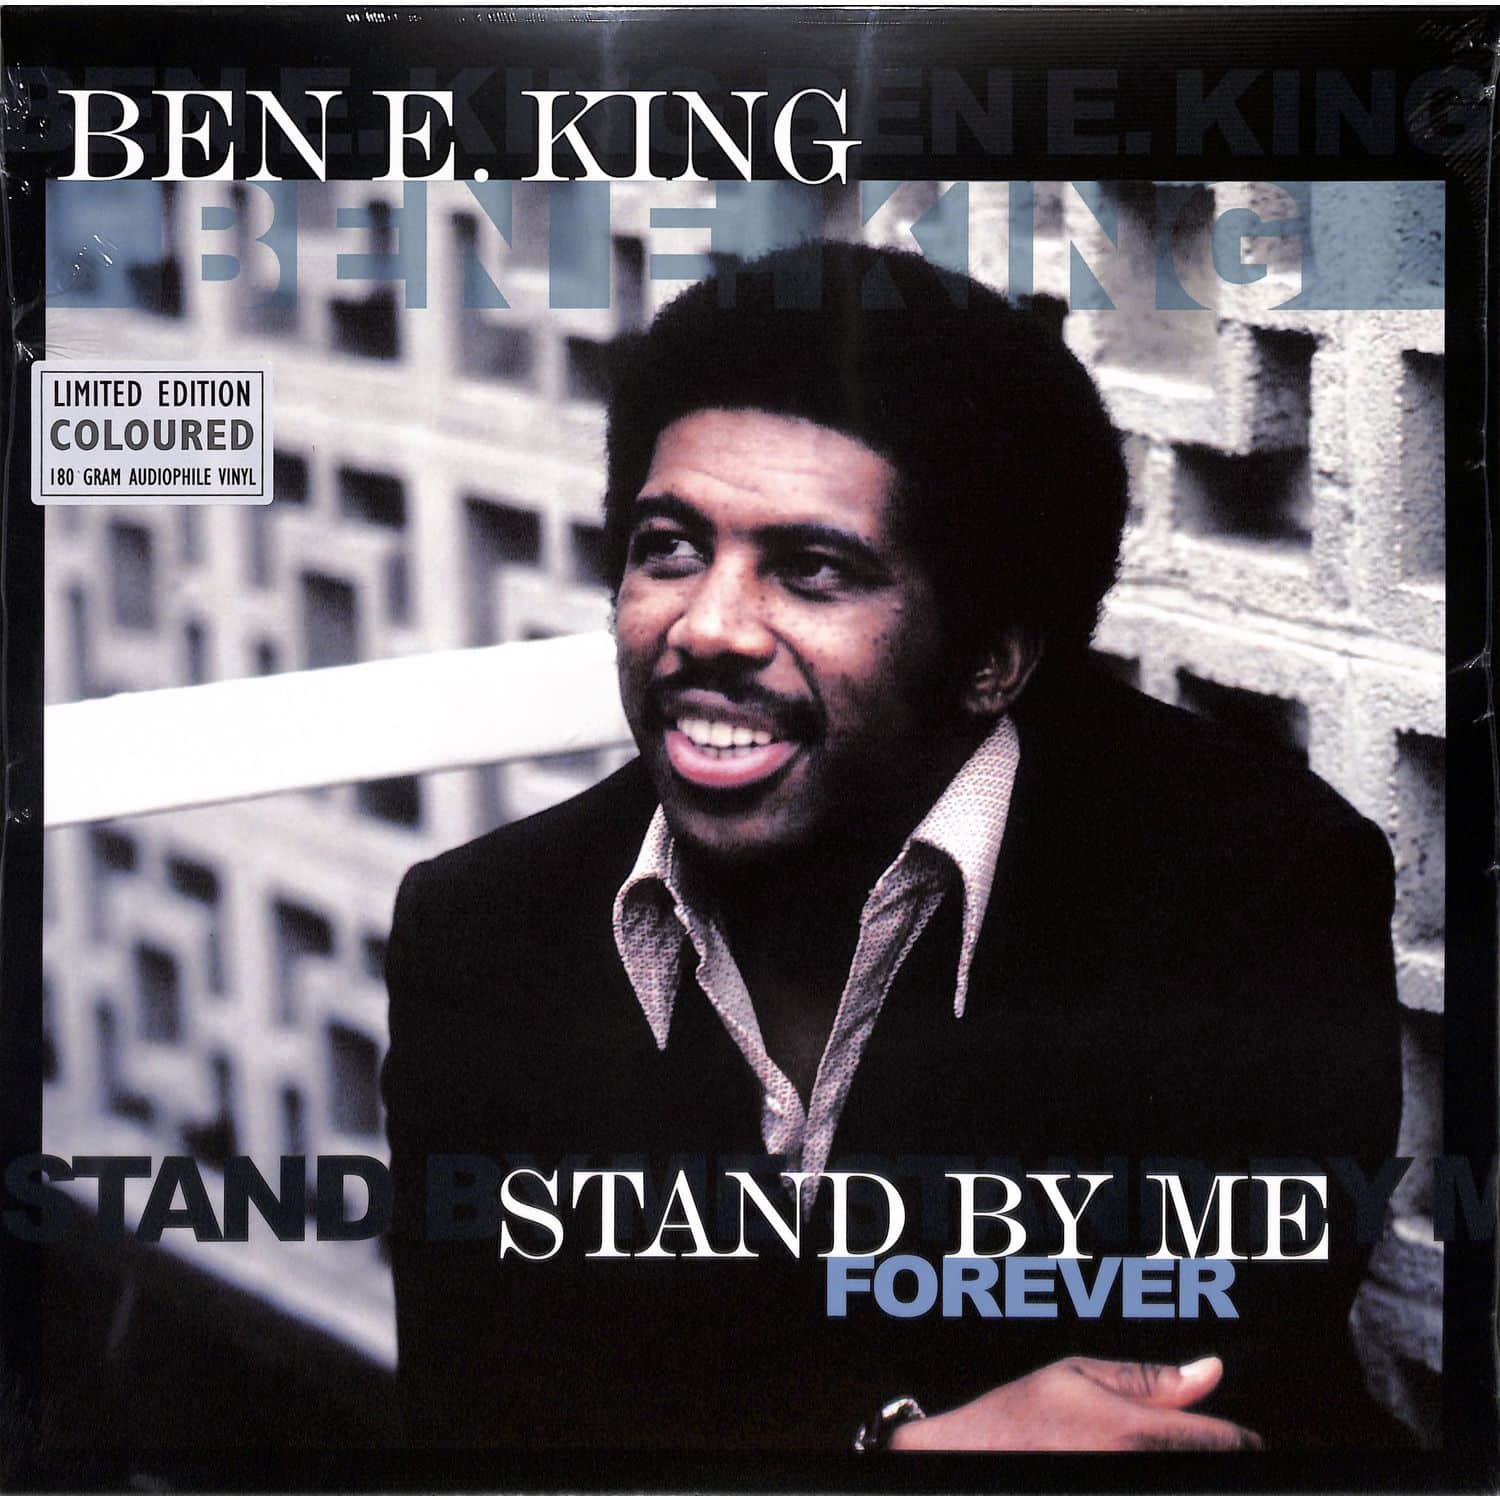 Ben E. King - STAND BY ME FOREVER 